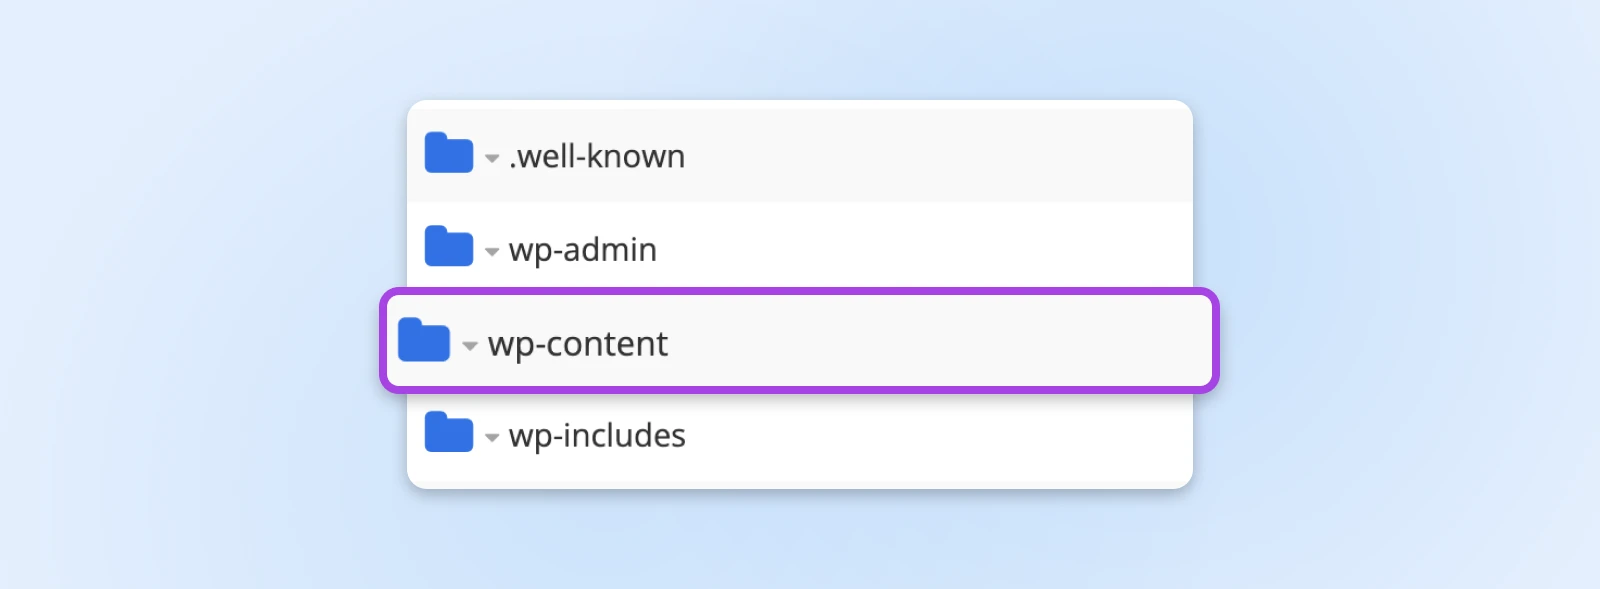 phpMyAdmin interface with the "Quick - display only the minimal options" checkbox selected and the "Export" tab highlighted.